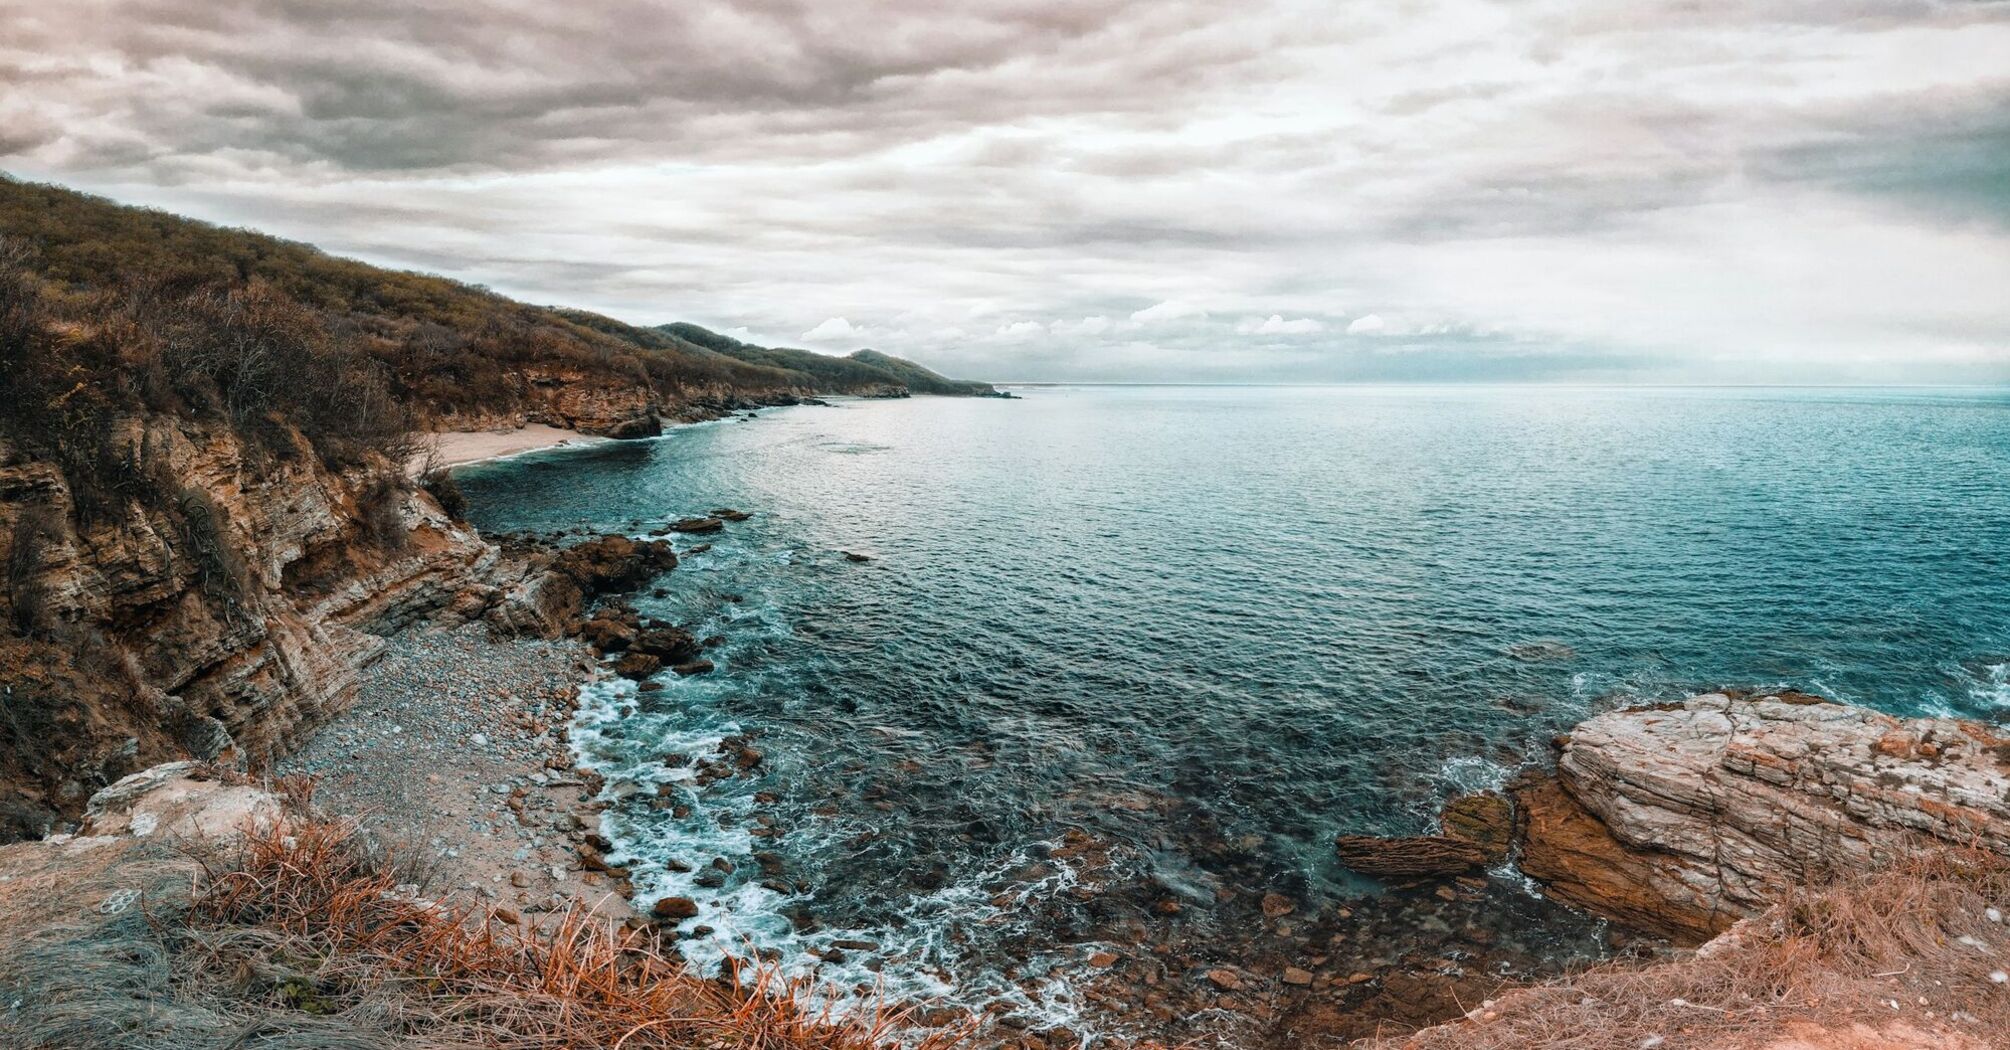 A serene coastal landscape of Nayarit, Mexico, featuring a pebbled beach, clear blue waters, and a rugged cliff under a cloudy sky